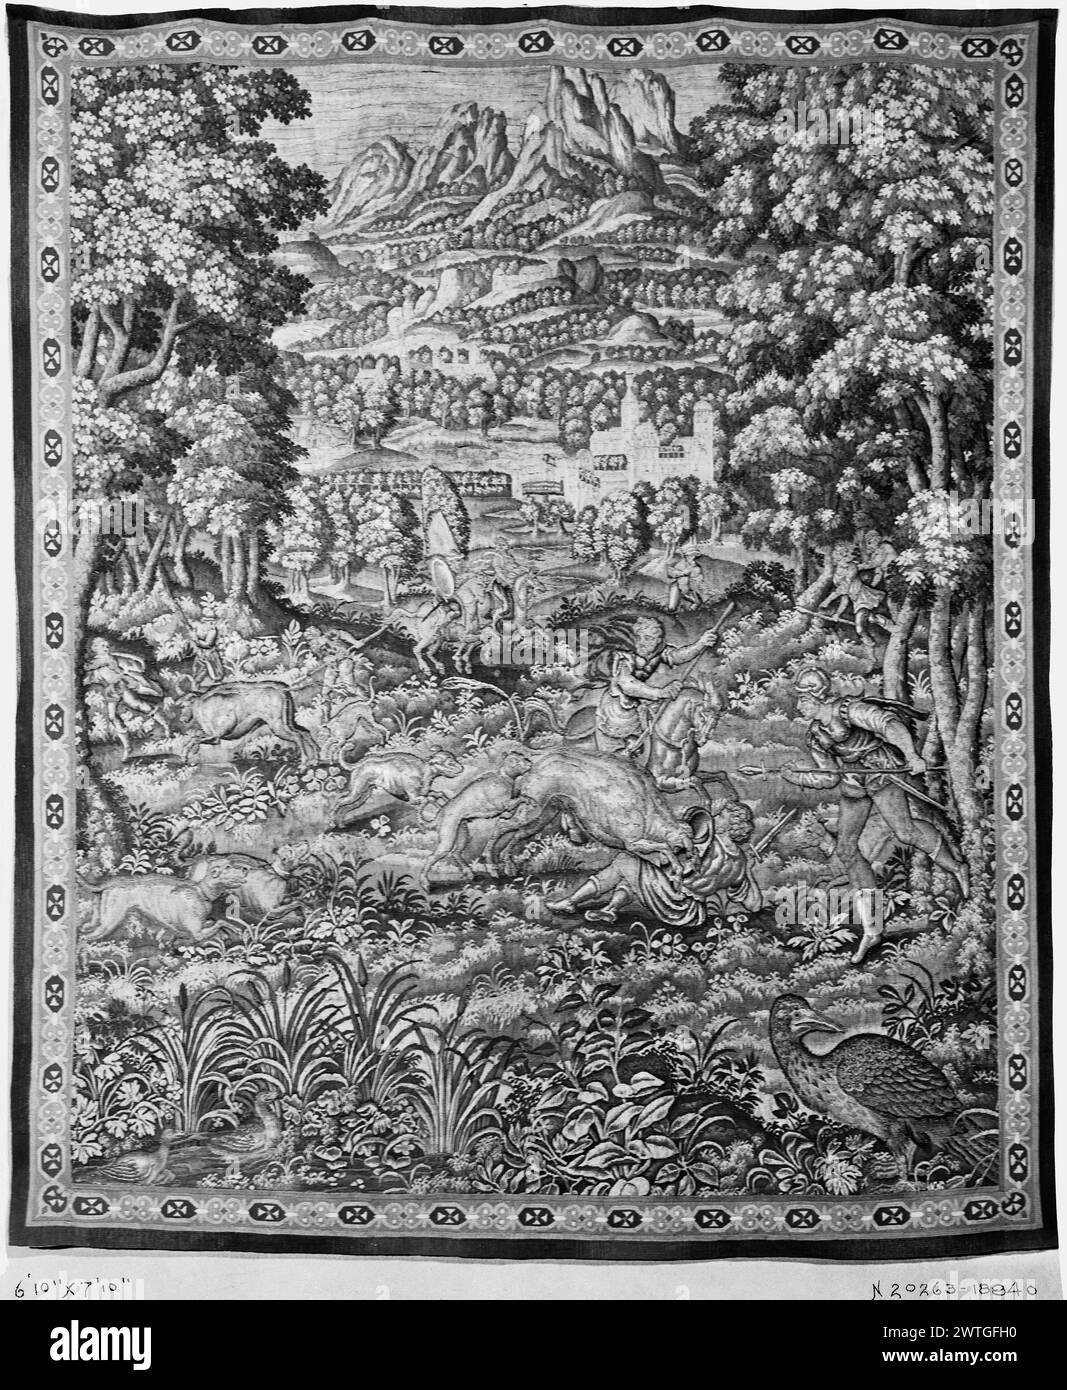 Game park with bull hunt. unknown c. 1580-1600 Tapestry Dimensions: H 7'10' x W 6'7' Tapestry Materials/Techniques: unknown Culture: Flemish Weaving Center: Brussels Ownership History: French & Co. purchased from Mr. H. Blank, invoiced 2/9/1937; unsold as of the 1956 inventory. Stock Photo